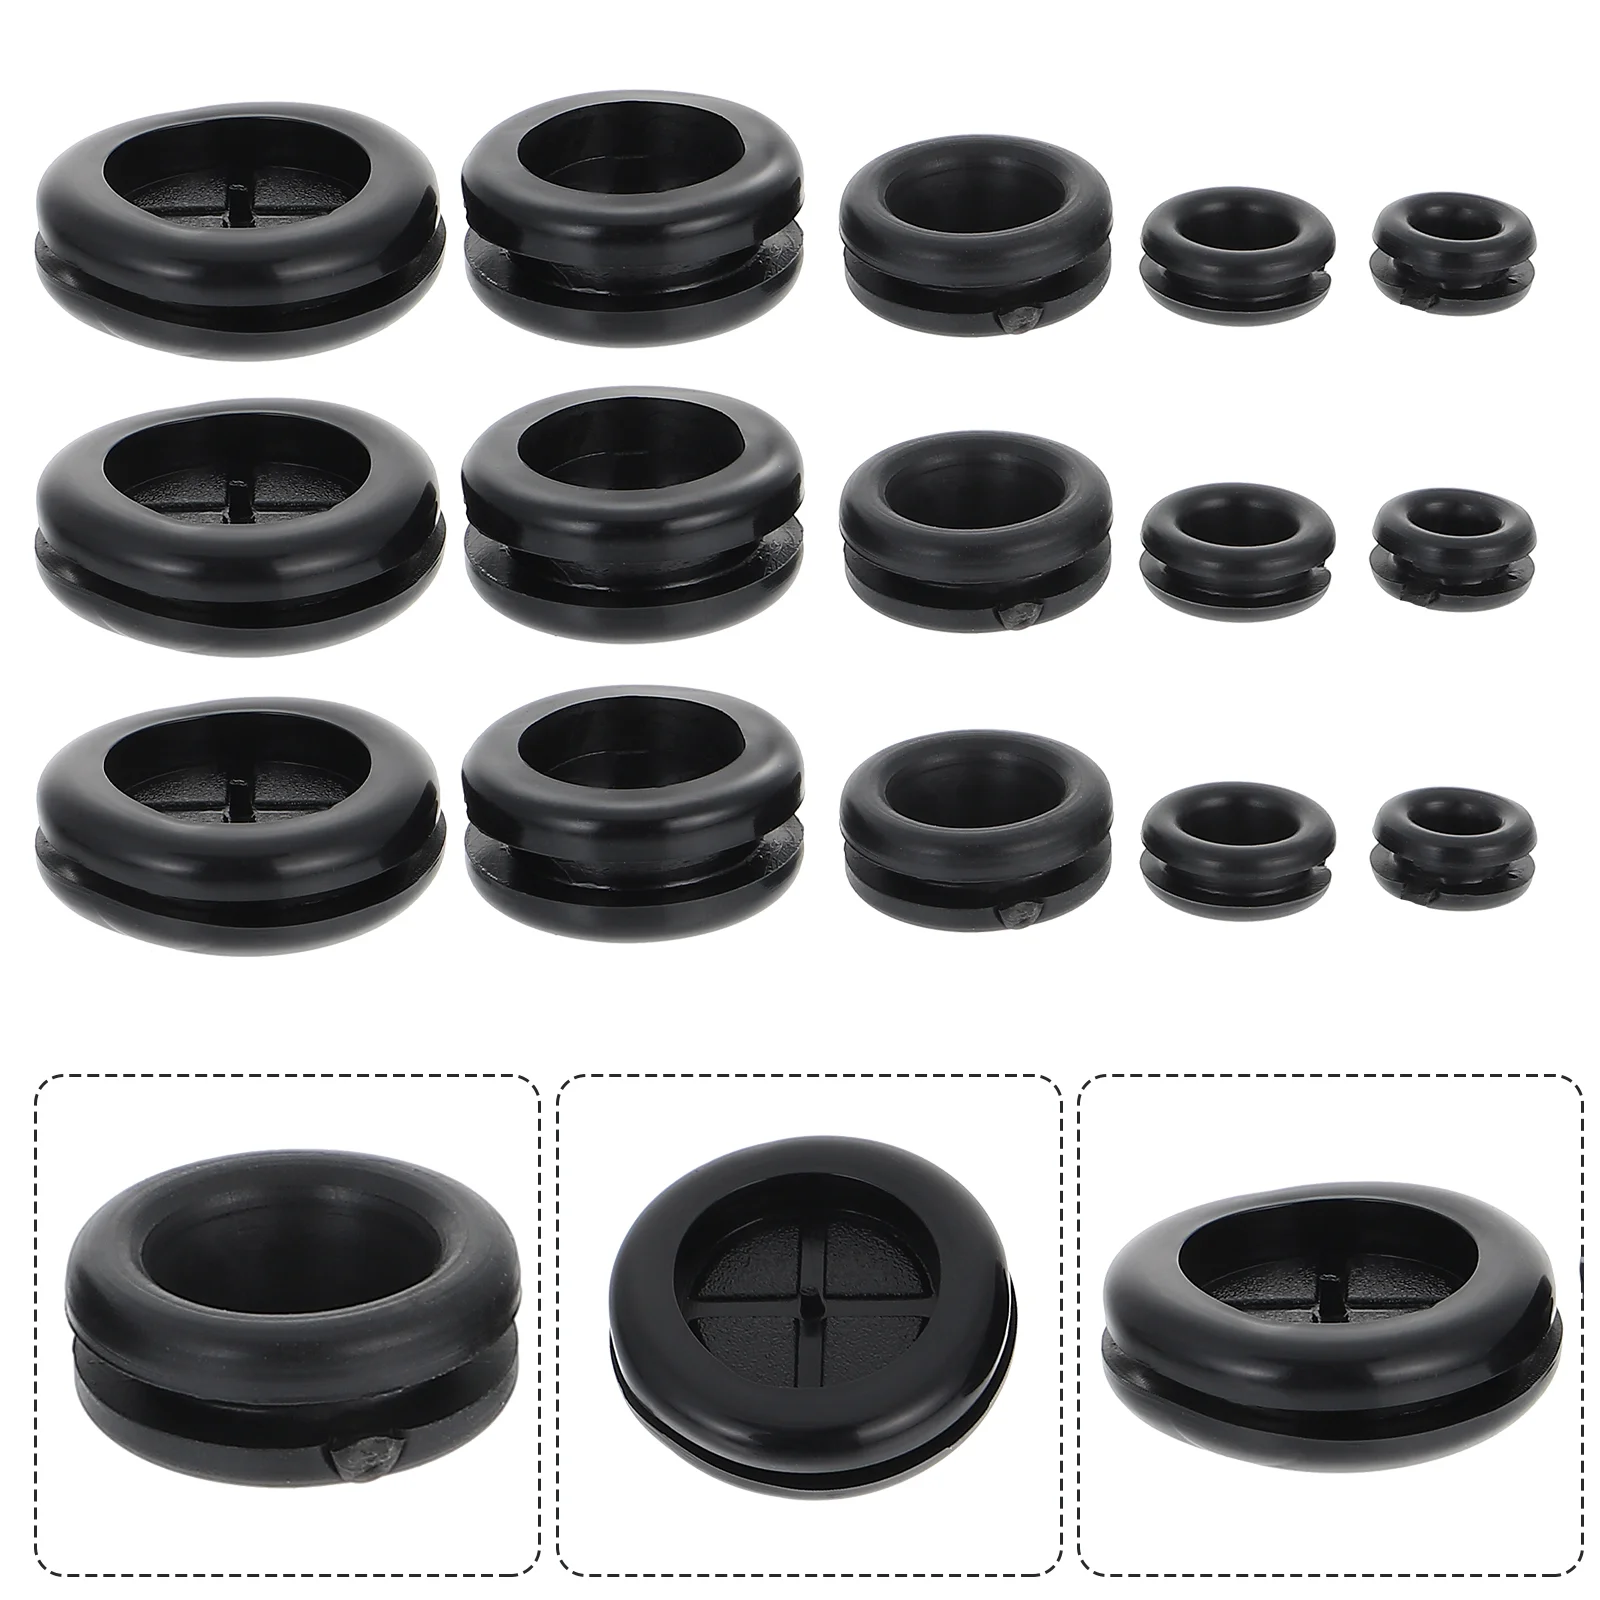 

50pcs Rubber Grommet Practical Professional Firewall Hole Plug Electrical Wire Gasket Rubber Washer Rubber Gasket